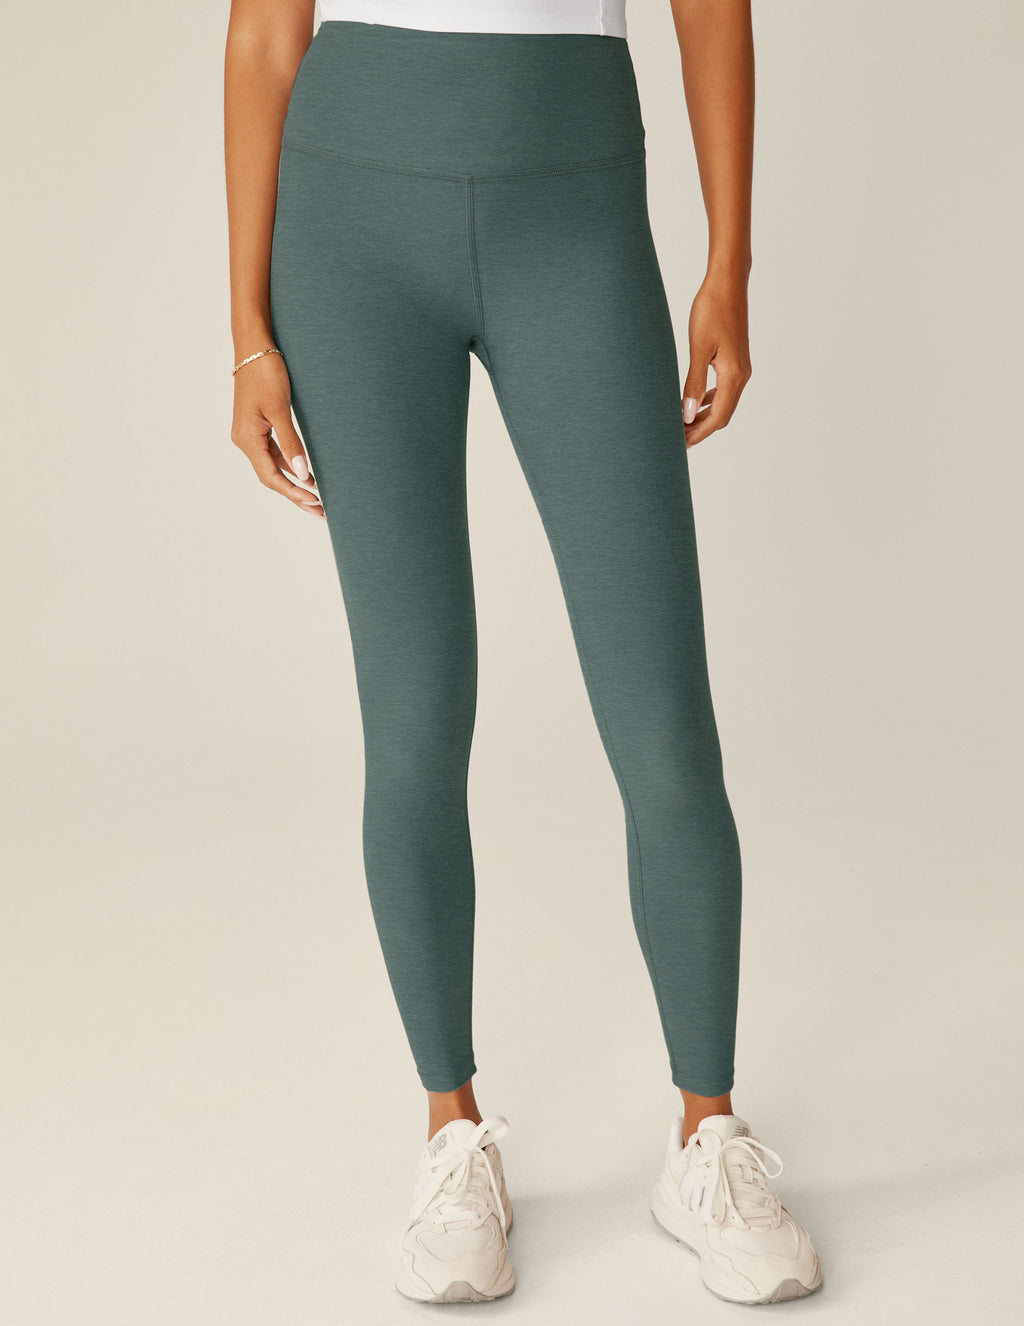 Buy Nike Womens 365 Mid Rise Tight Crop Leggings at Amazon.in